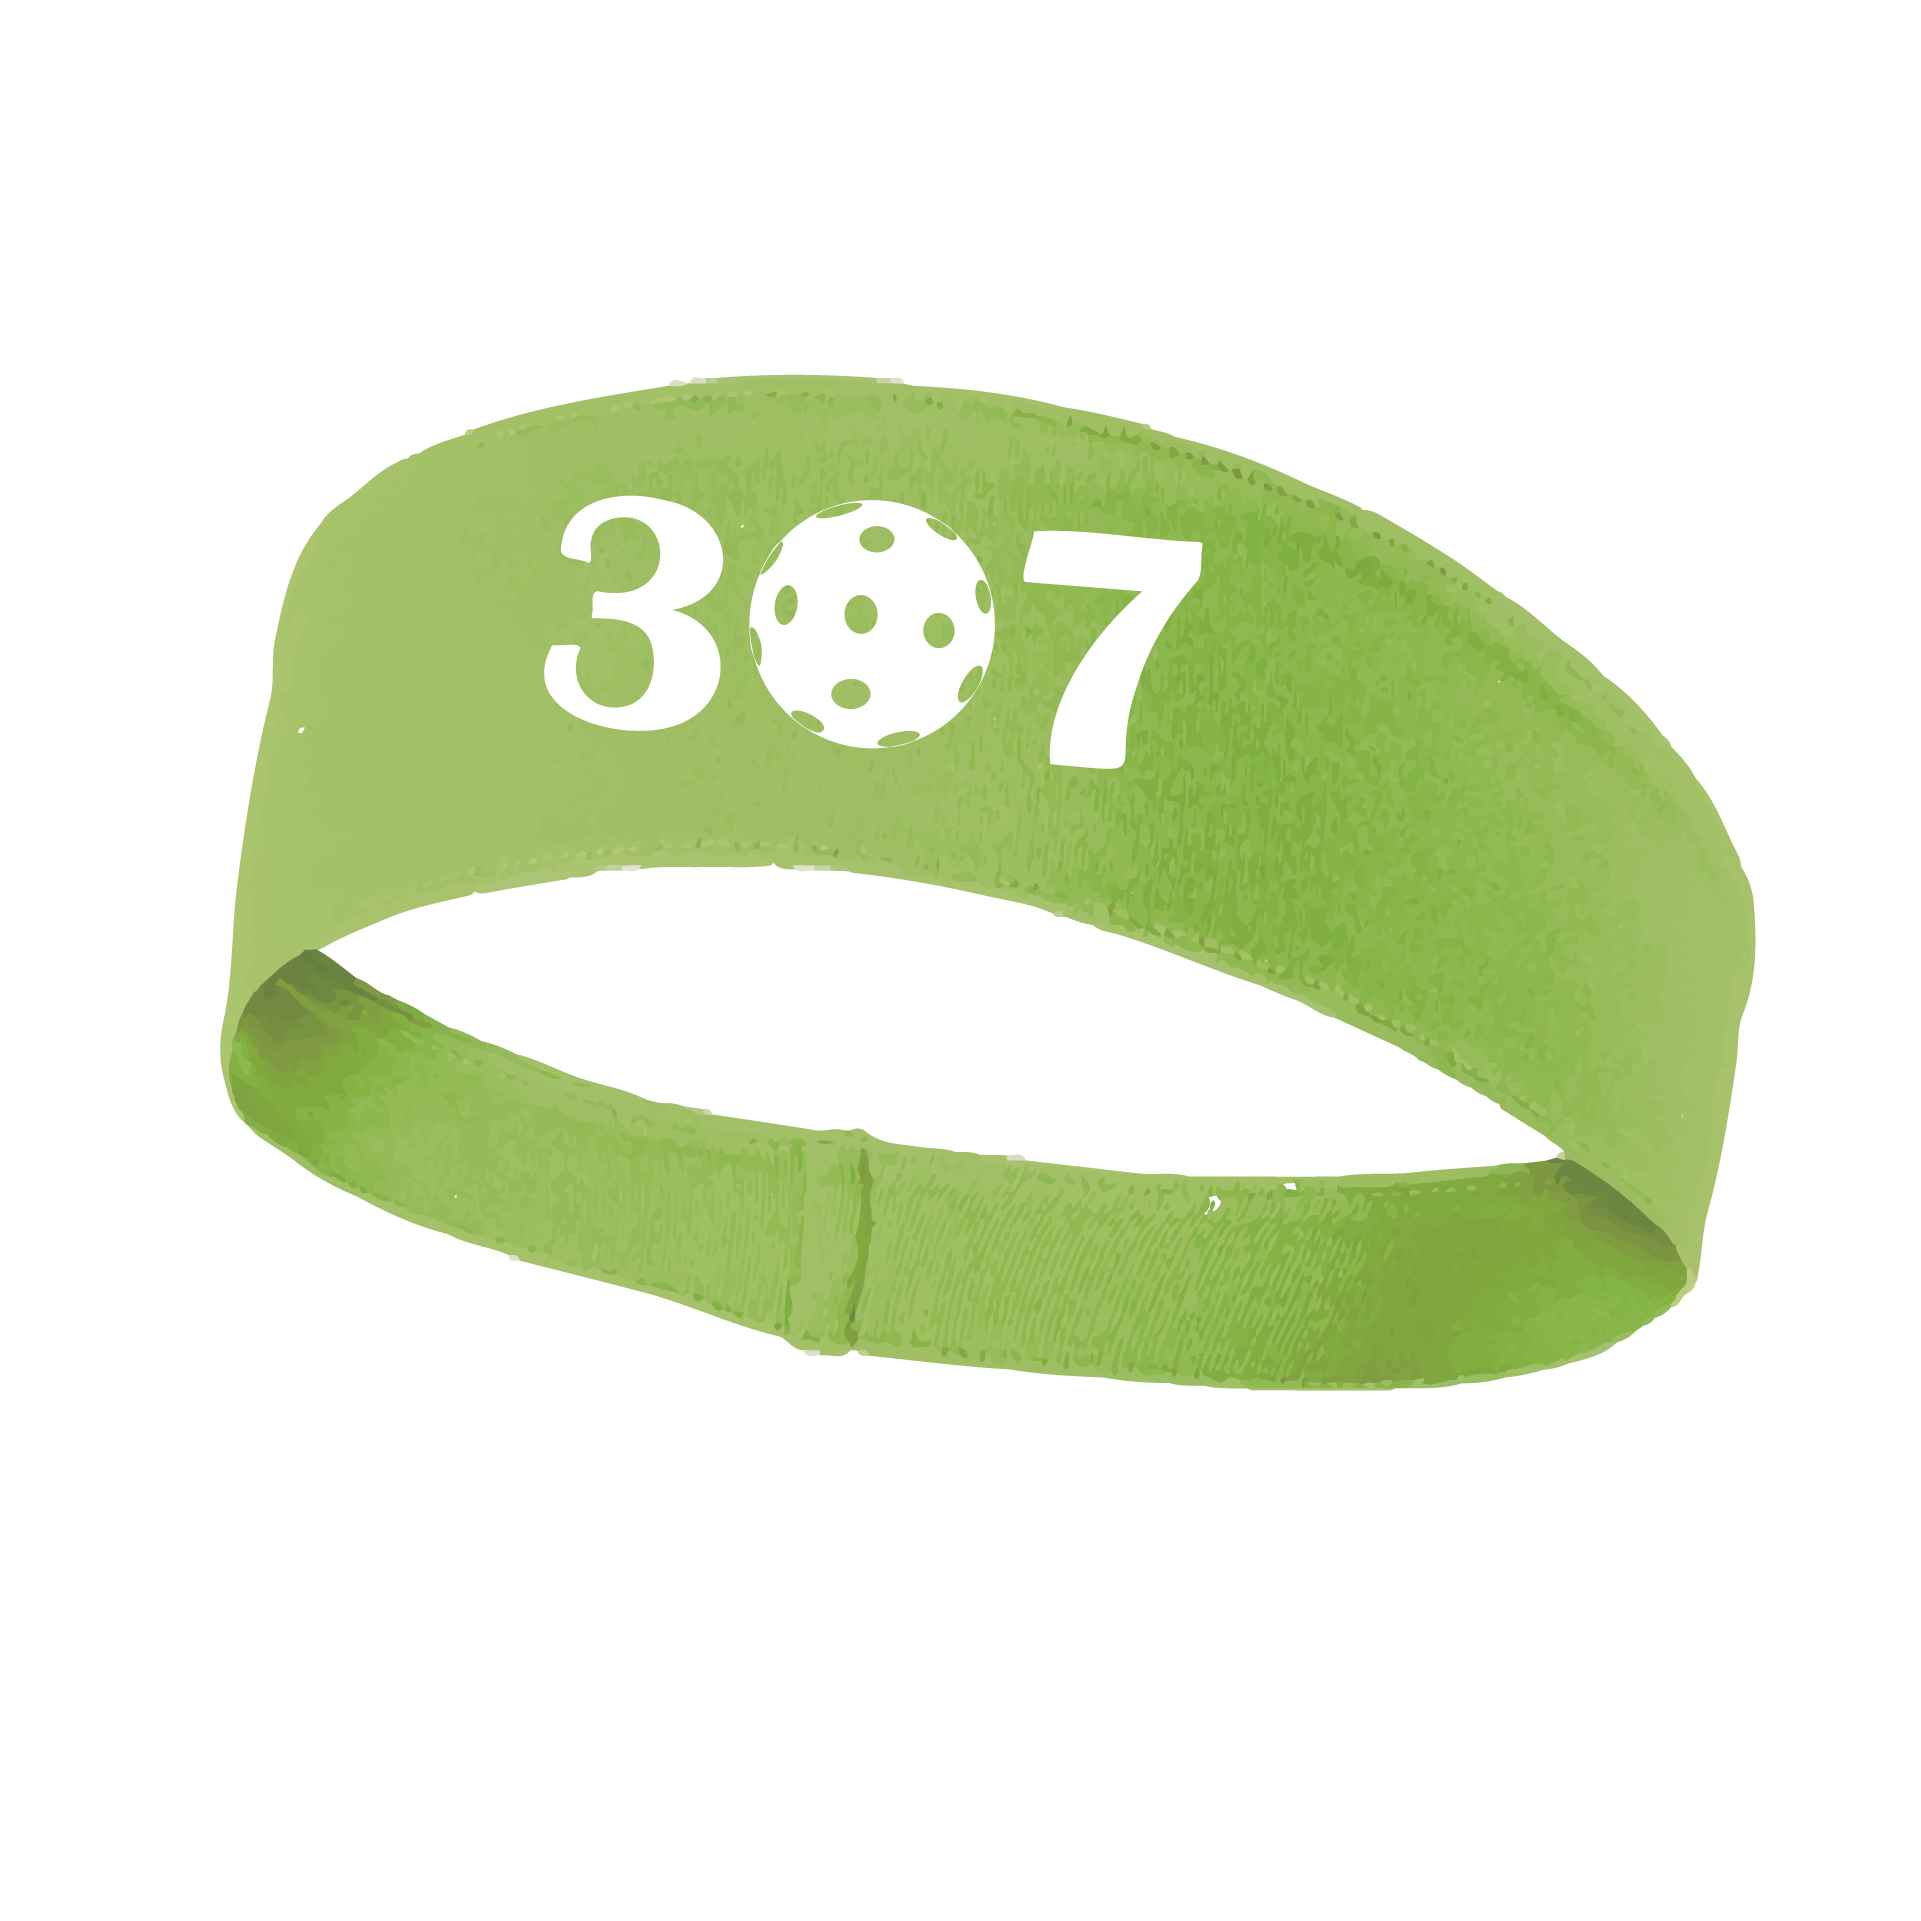 Design: 307 Wyoming Pickleball Club  This fun, pickleball designed, moisture-wicking headband narrows in the back to fit more securely. Single-needle top-stitched edging. These headbands come in a variety of colors. Truly shows your love for the sport of pickleball!!